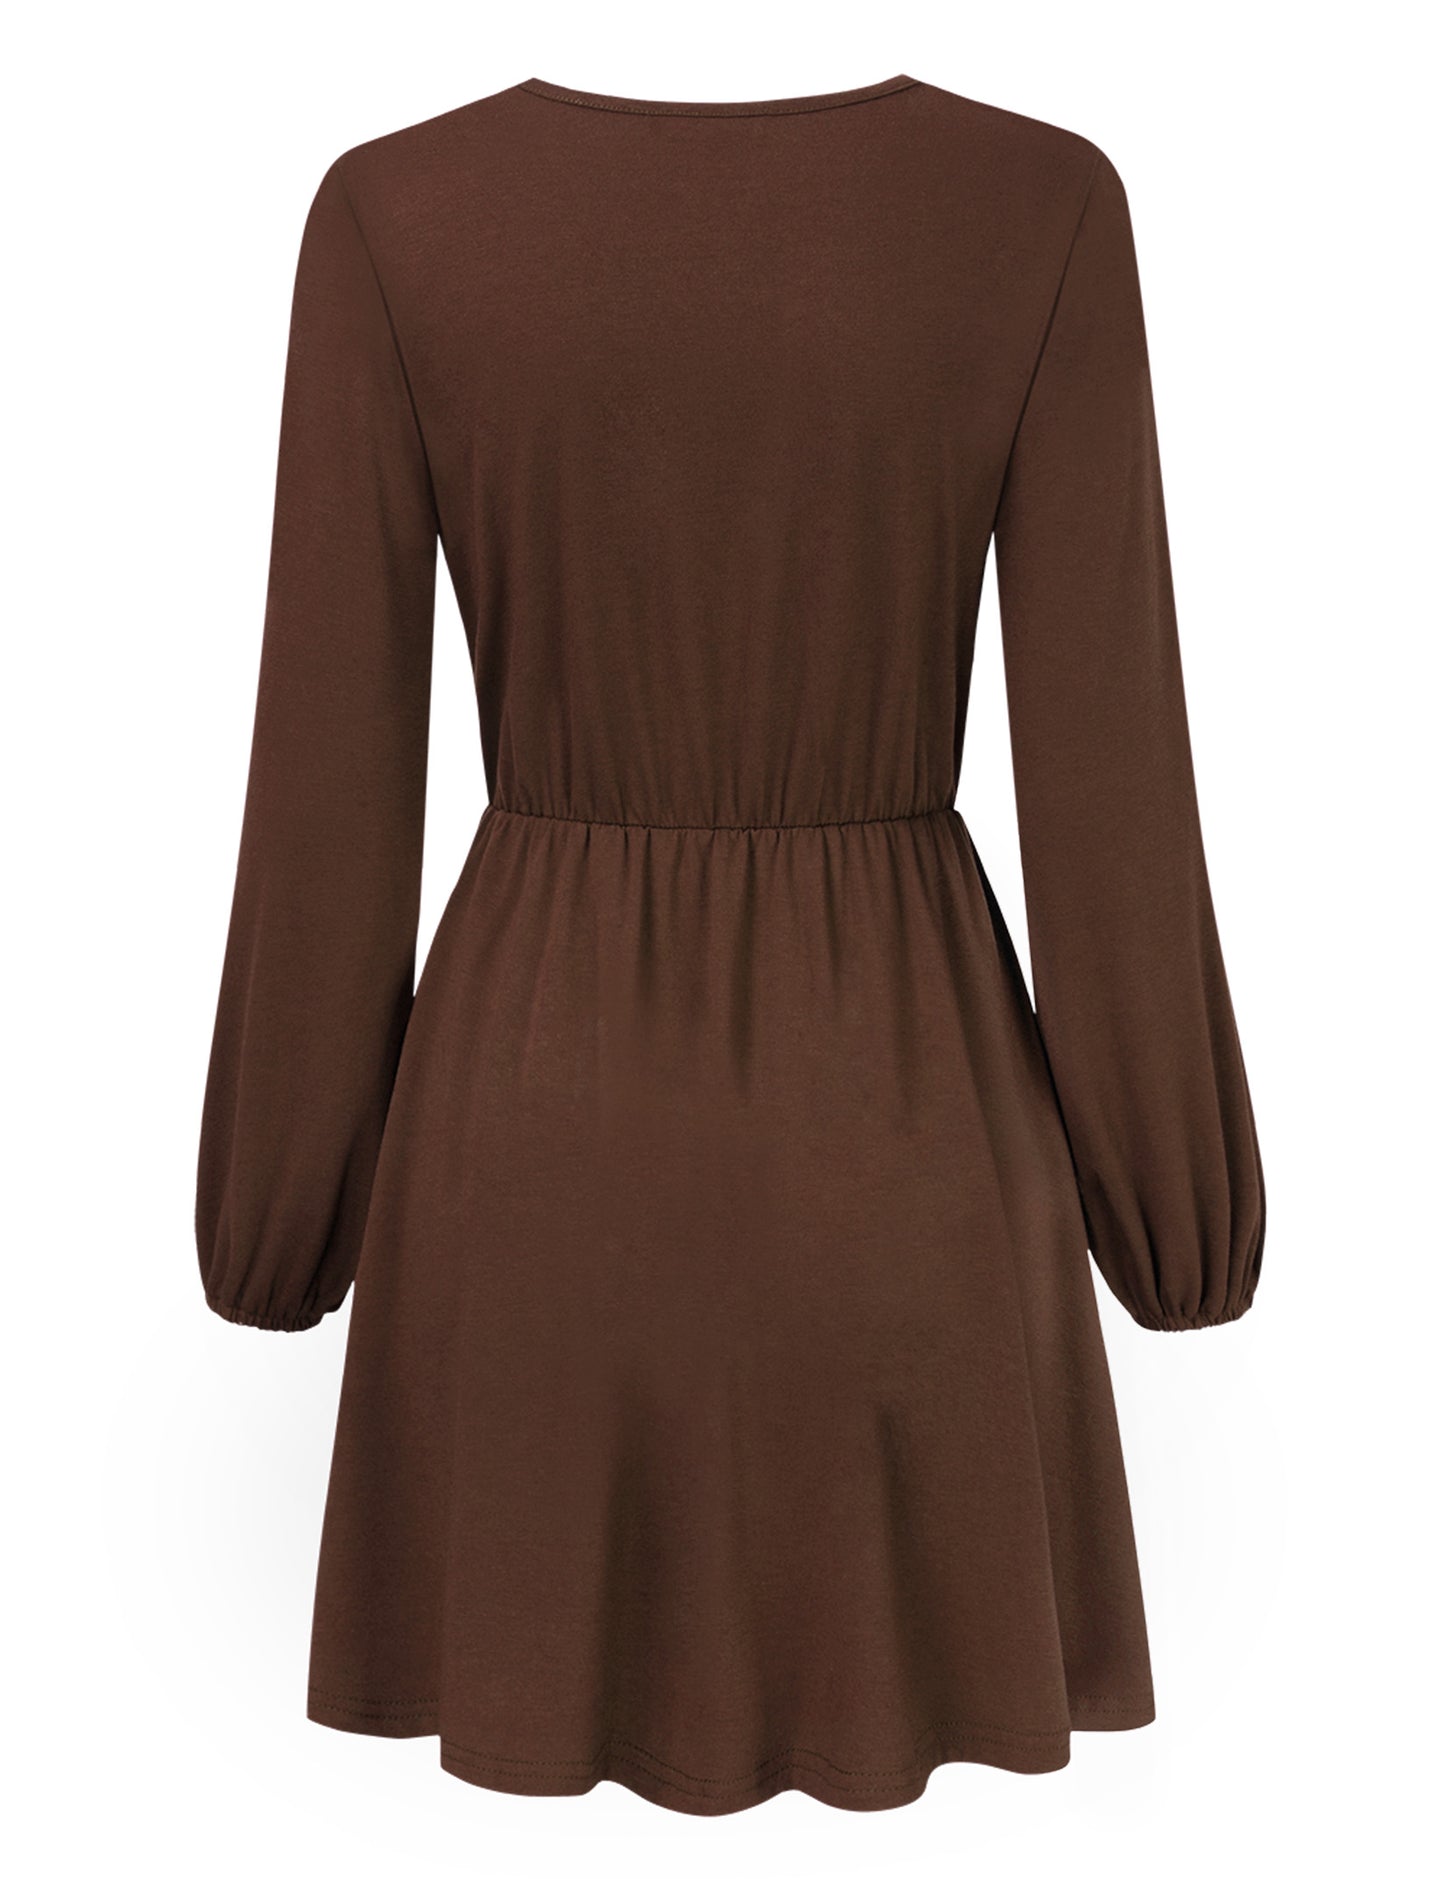 YESFASHION Women V-Neck A-Line Solid Plain Party Casual Mini Dress Brown